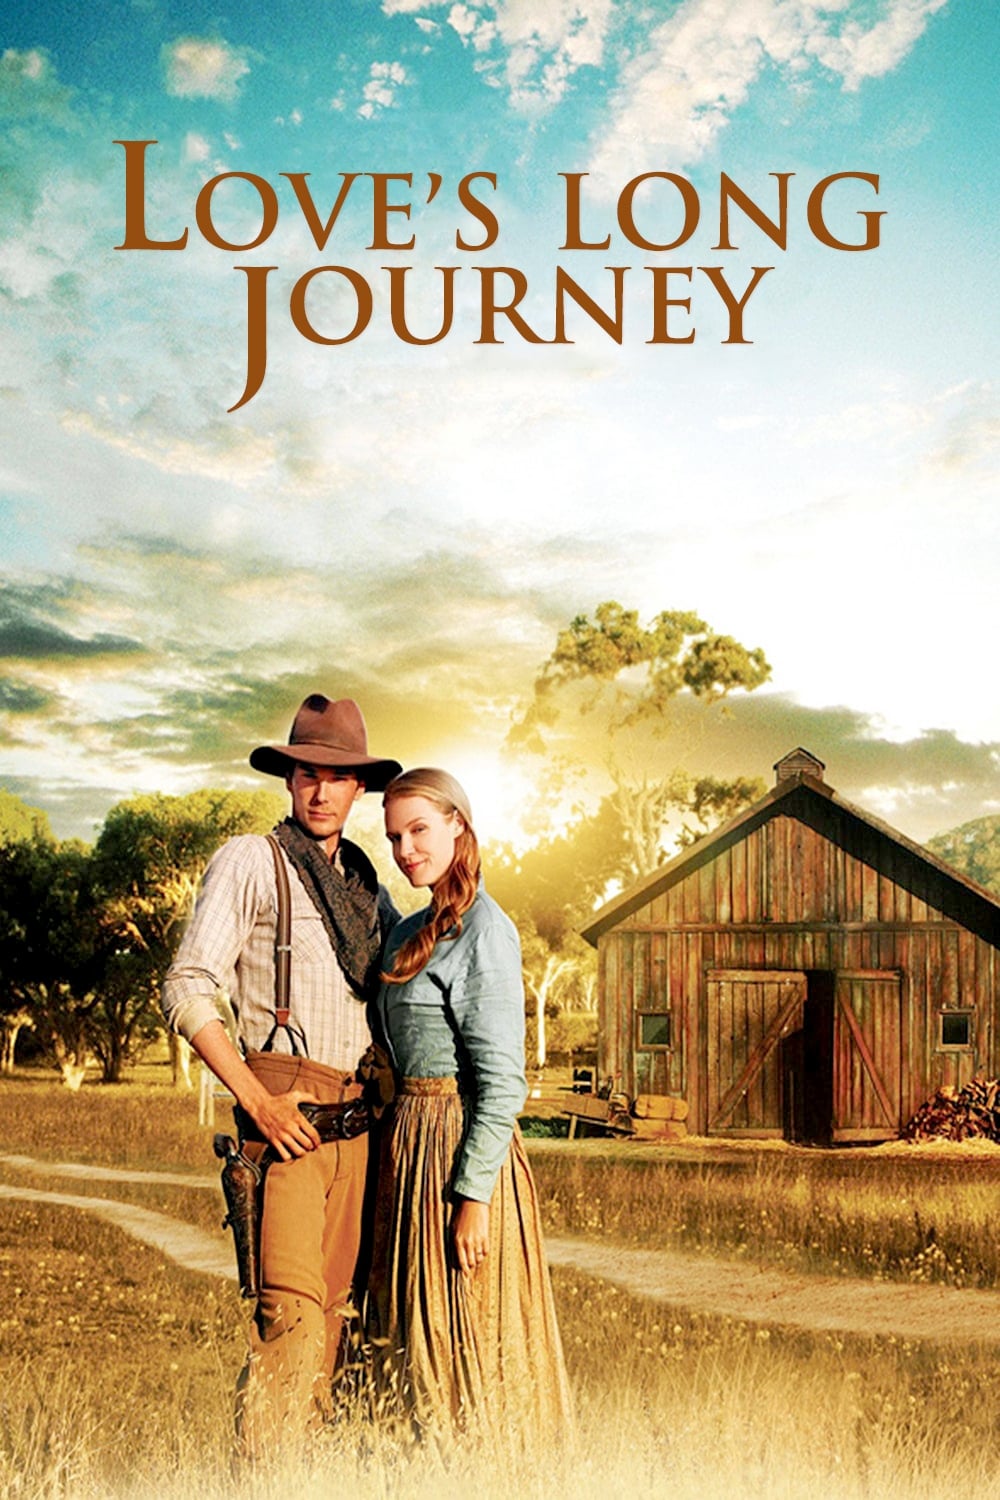 love's long journey movie for free